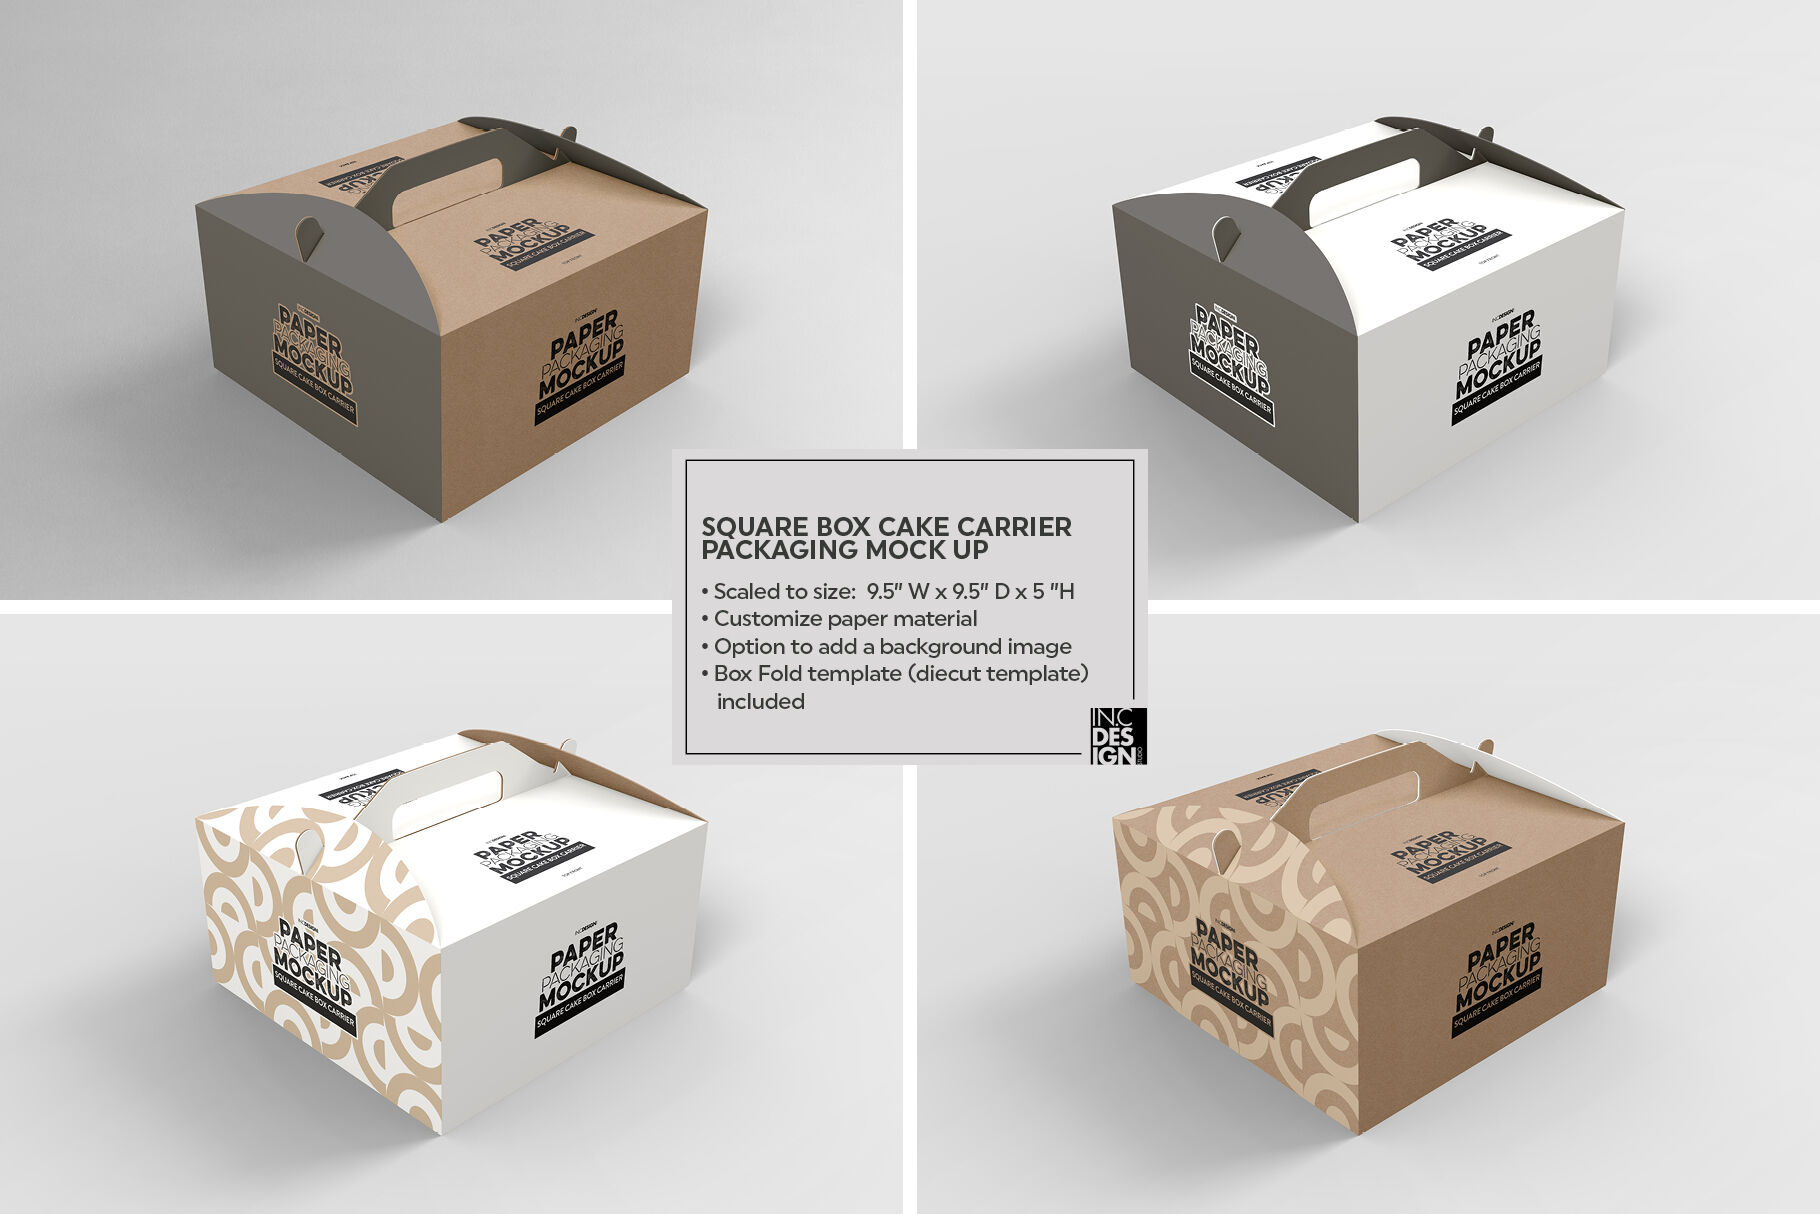 Download Square Cake Box Carrier Packaging Mockup By Inc Design Studio Thehungryjpeg Com